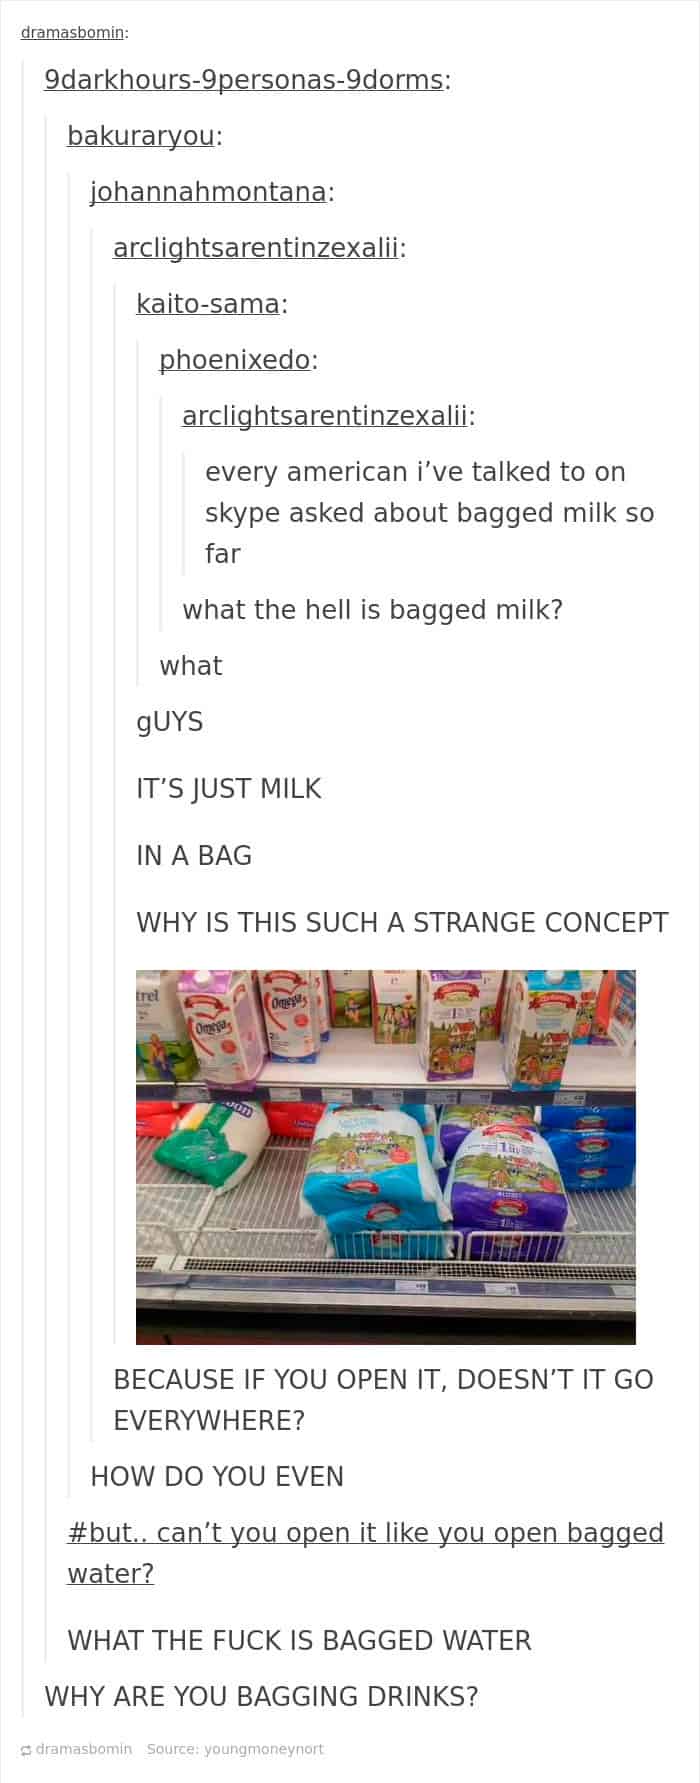 Funny Images About Canada bagged milk